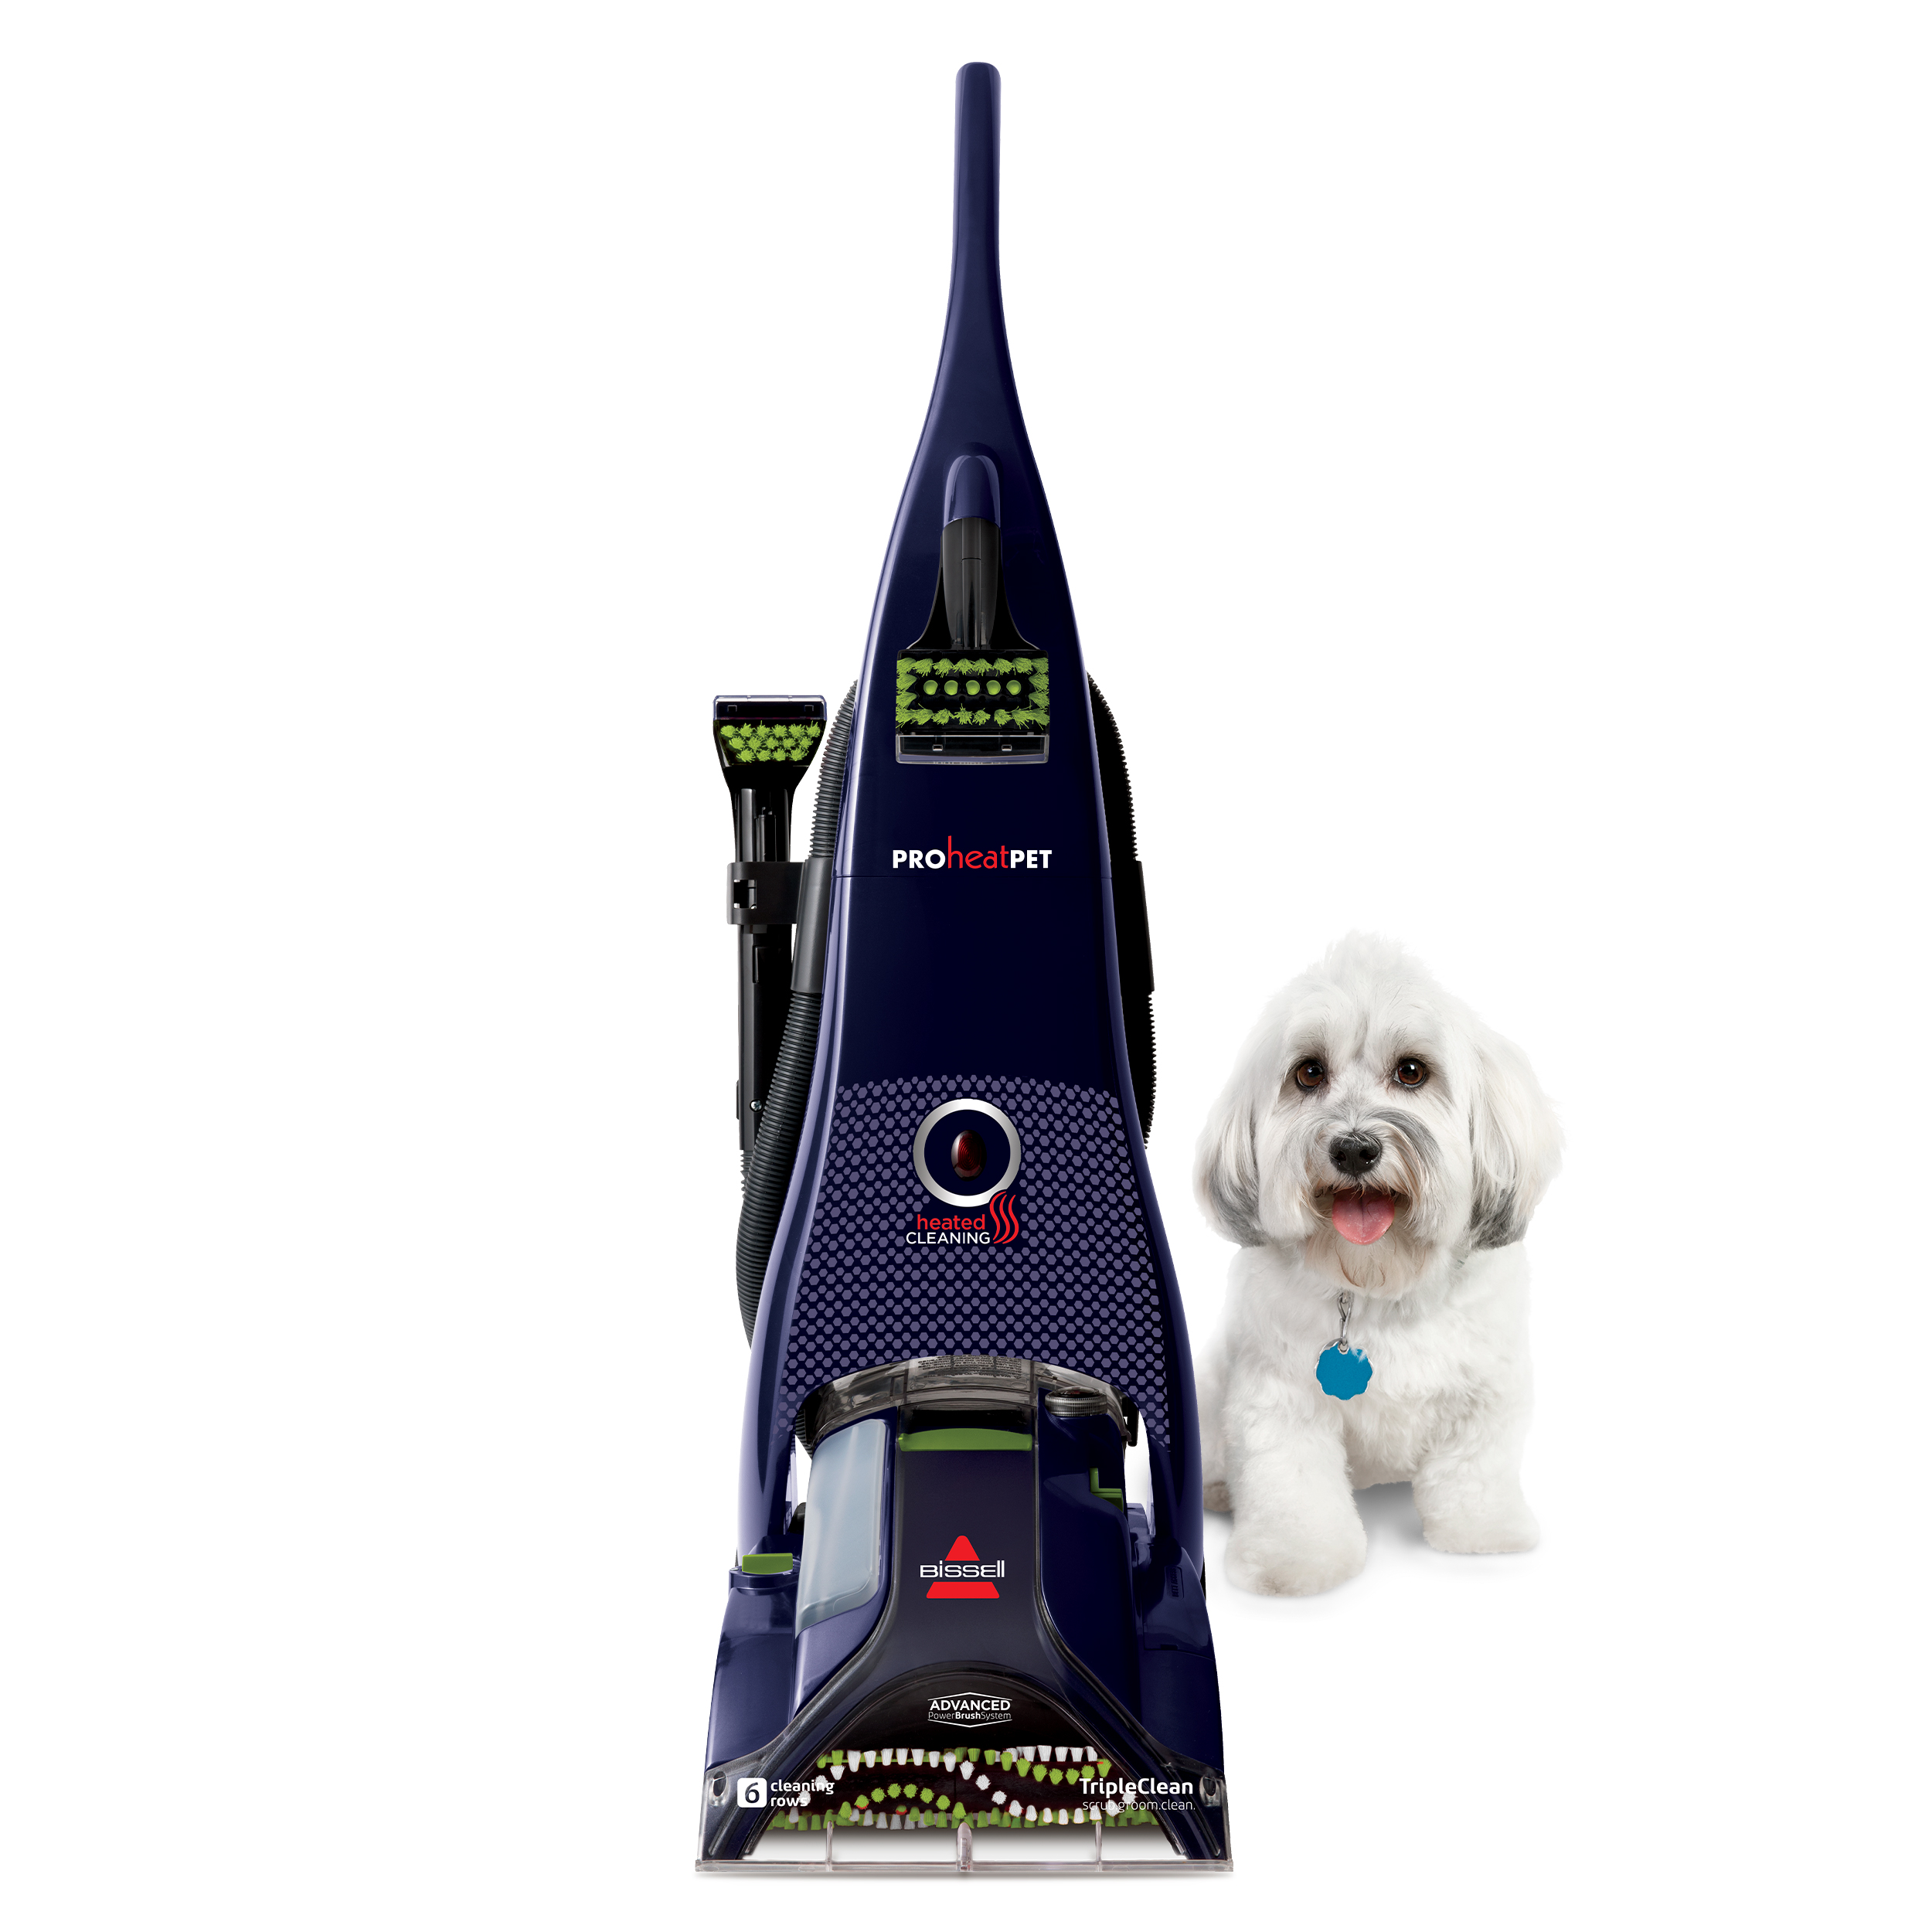 BISSELL ProHeat Pet Advanced Full-Size Carpet Cleaner, 1799 - image 1 of 15